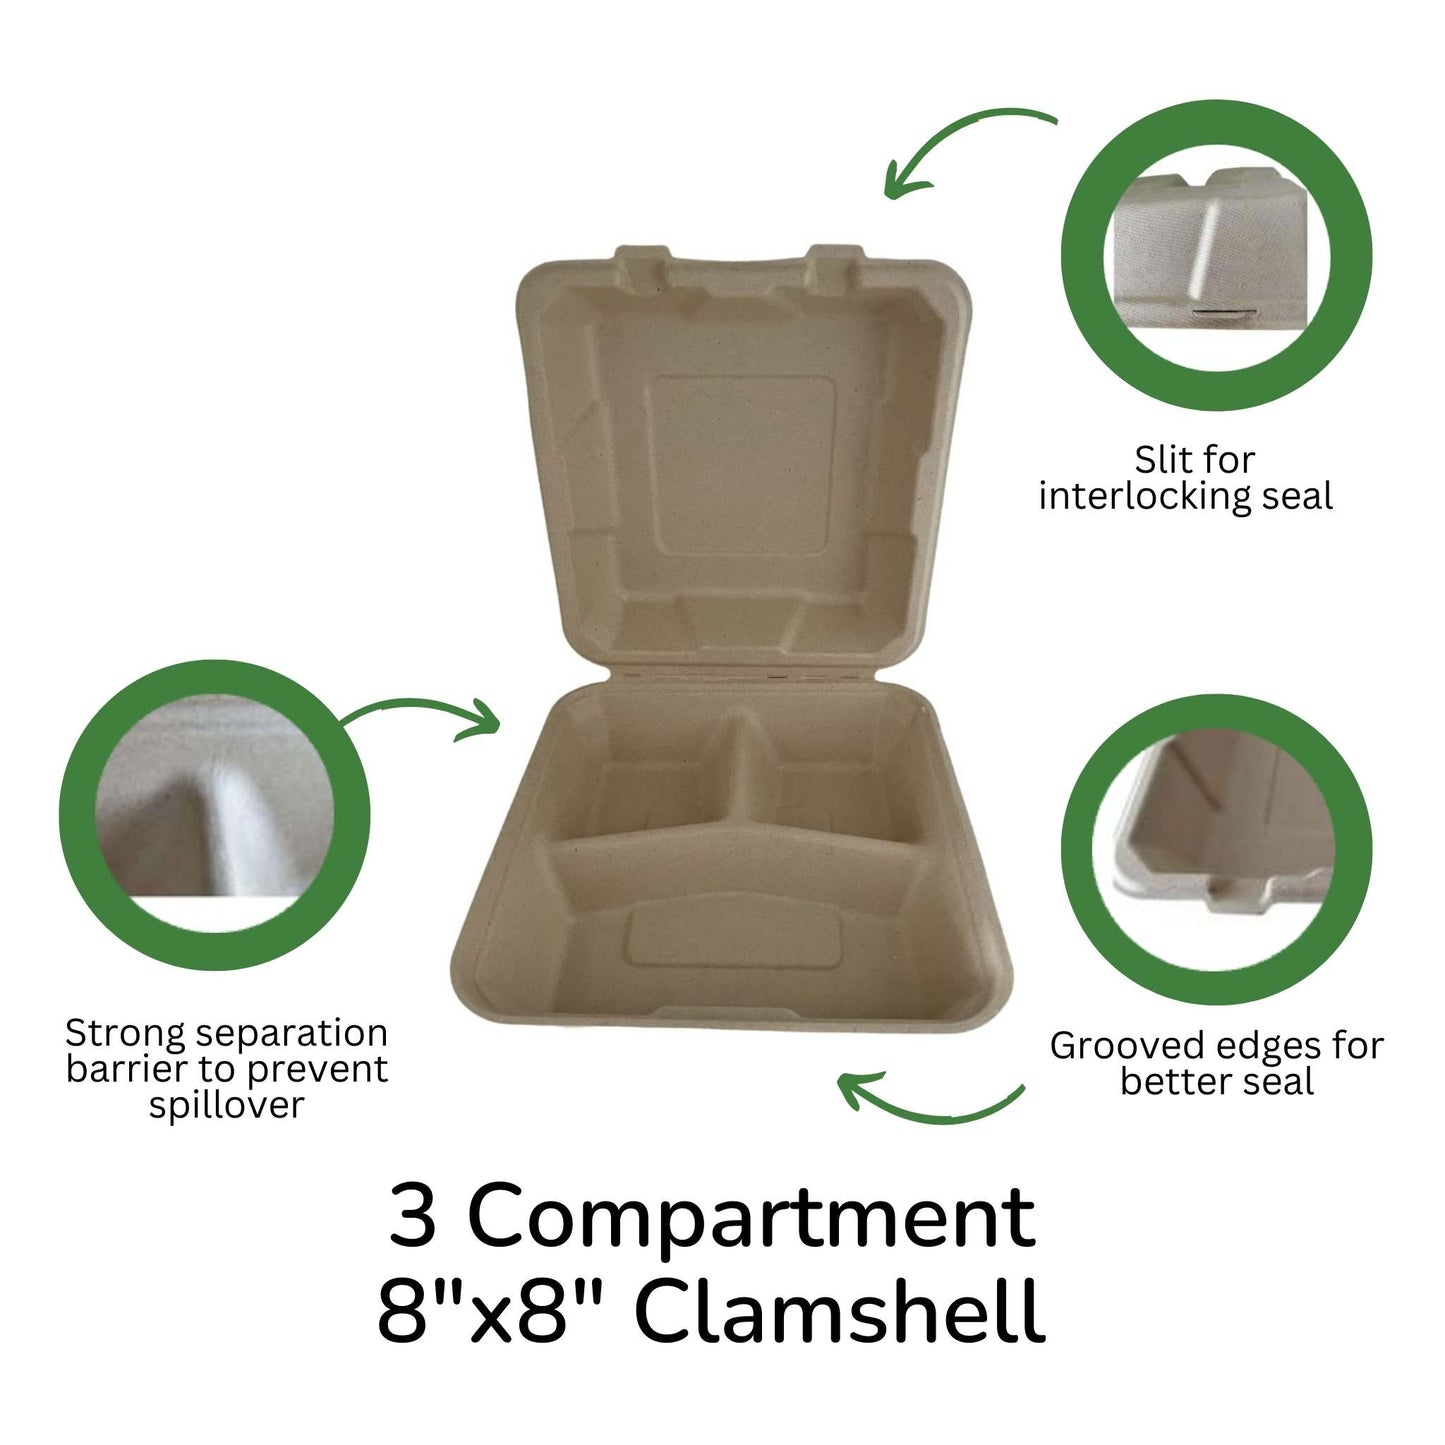 Clamshell 3-compartment container 8" x 8"